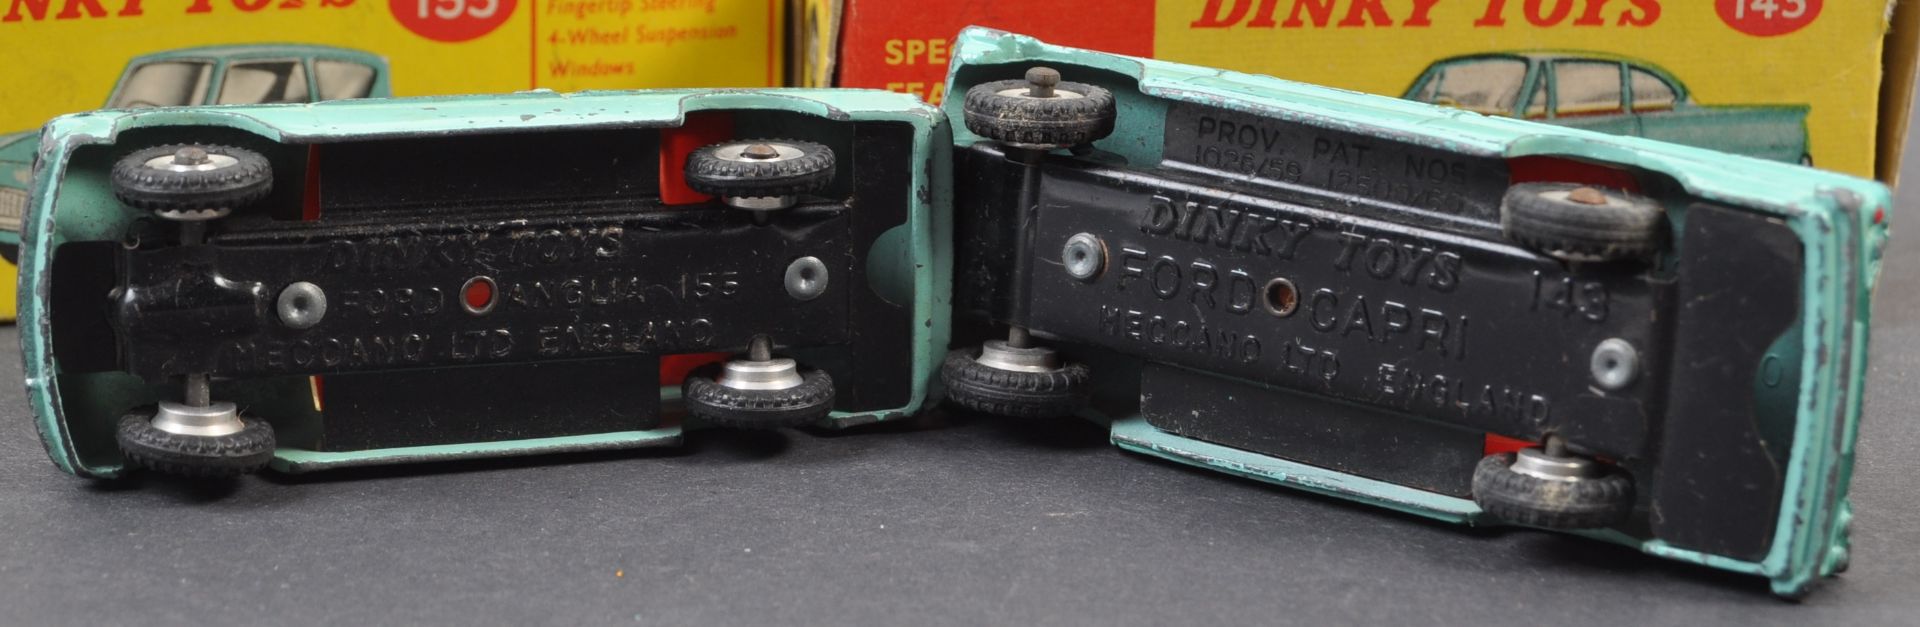 TWO VINTAGE DINKY TOYS BOXED DIECAST MODEL FORDS - Image 4 of 4